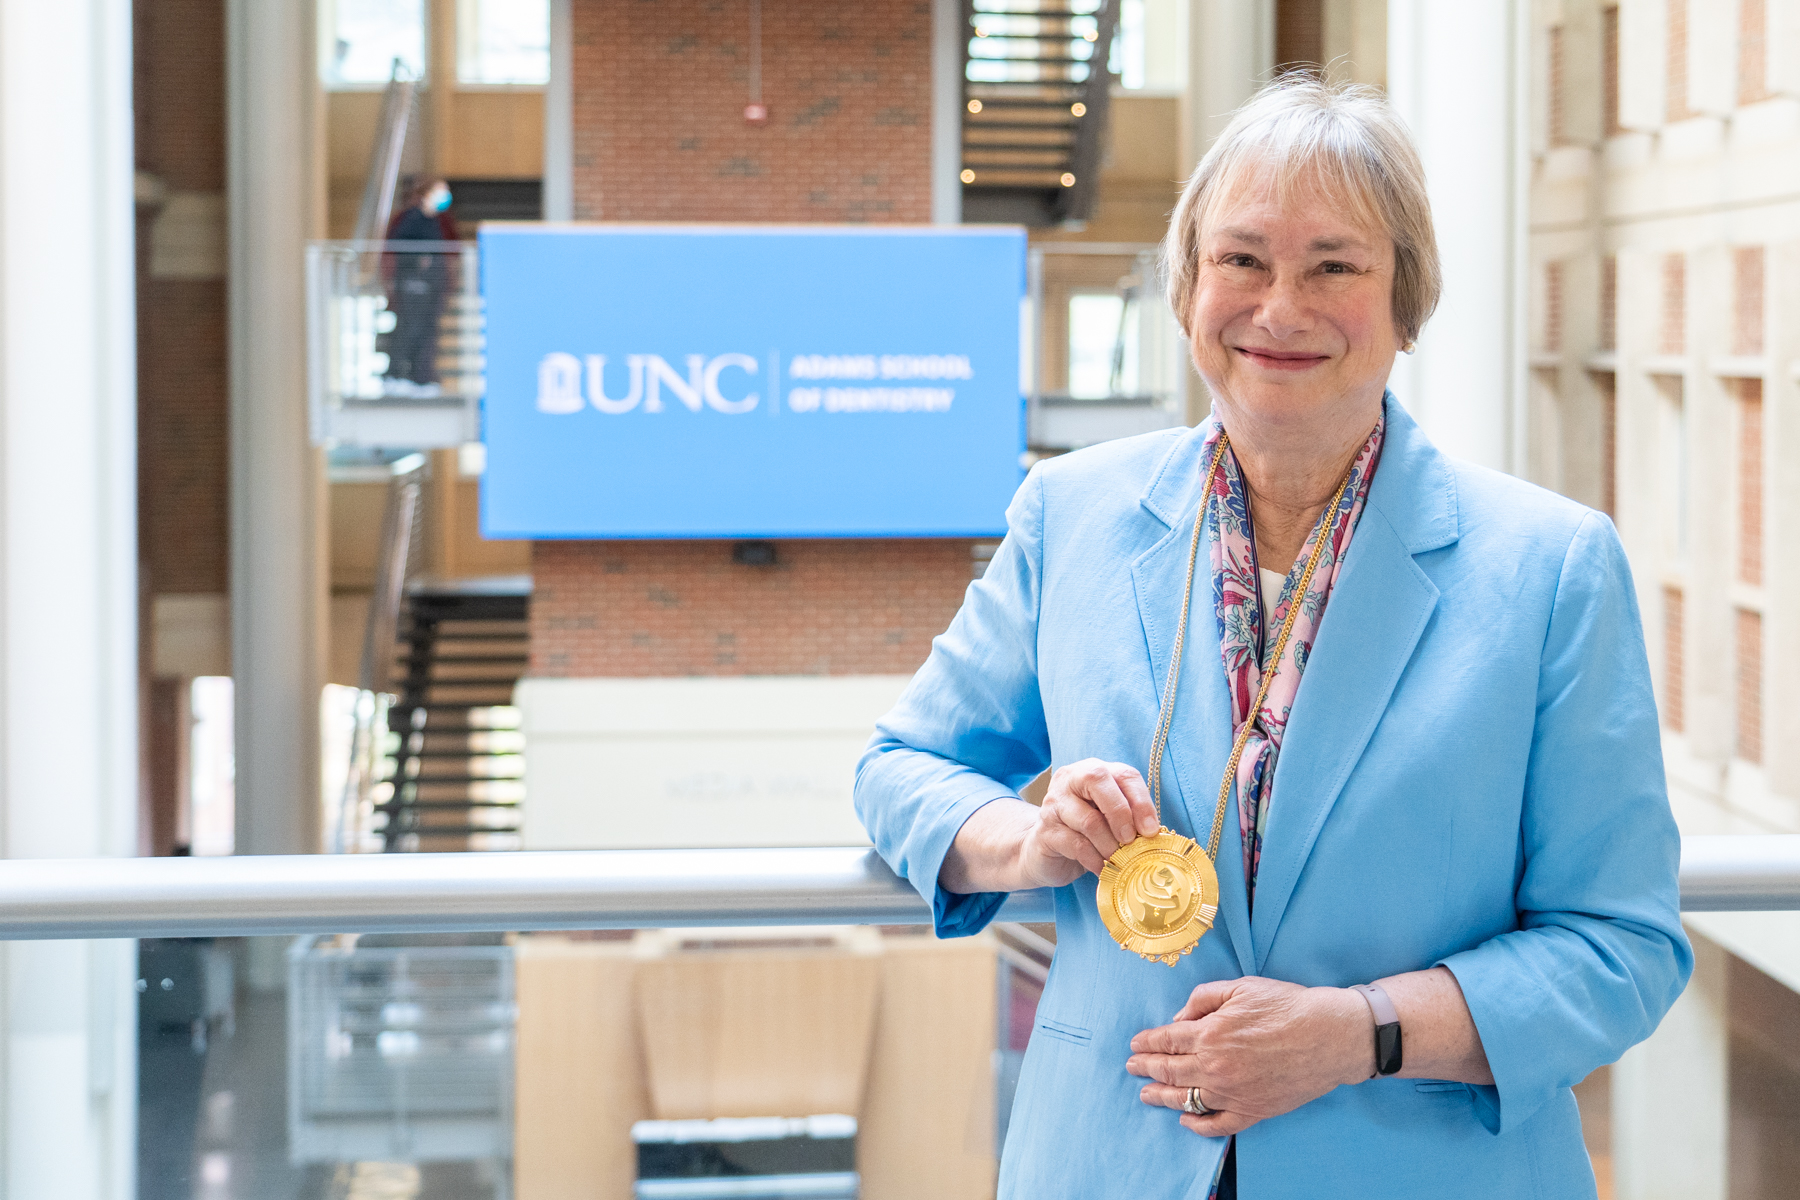 Woman in blue jacket holds up golden medal.